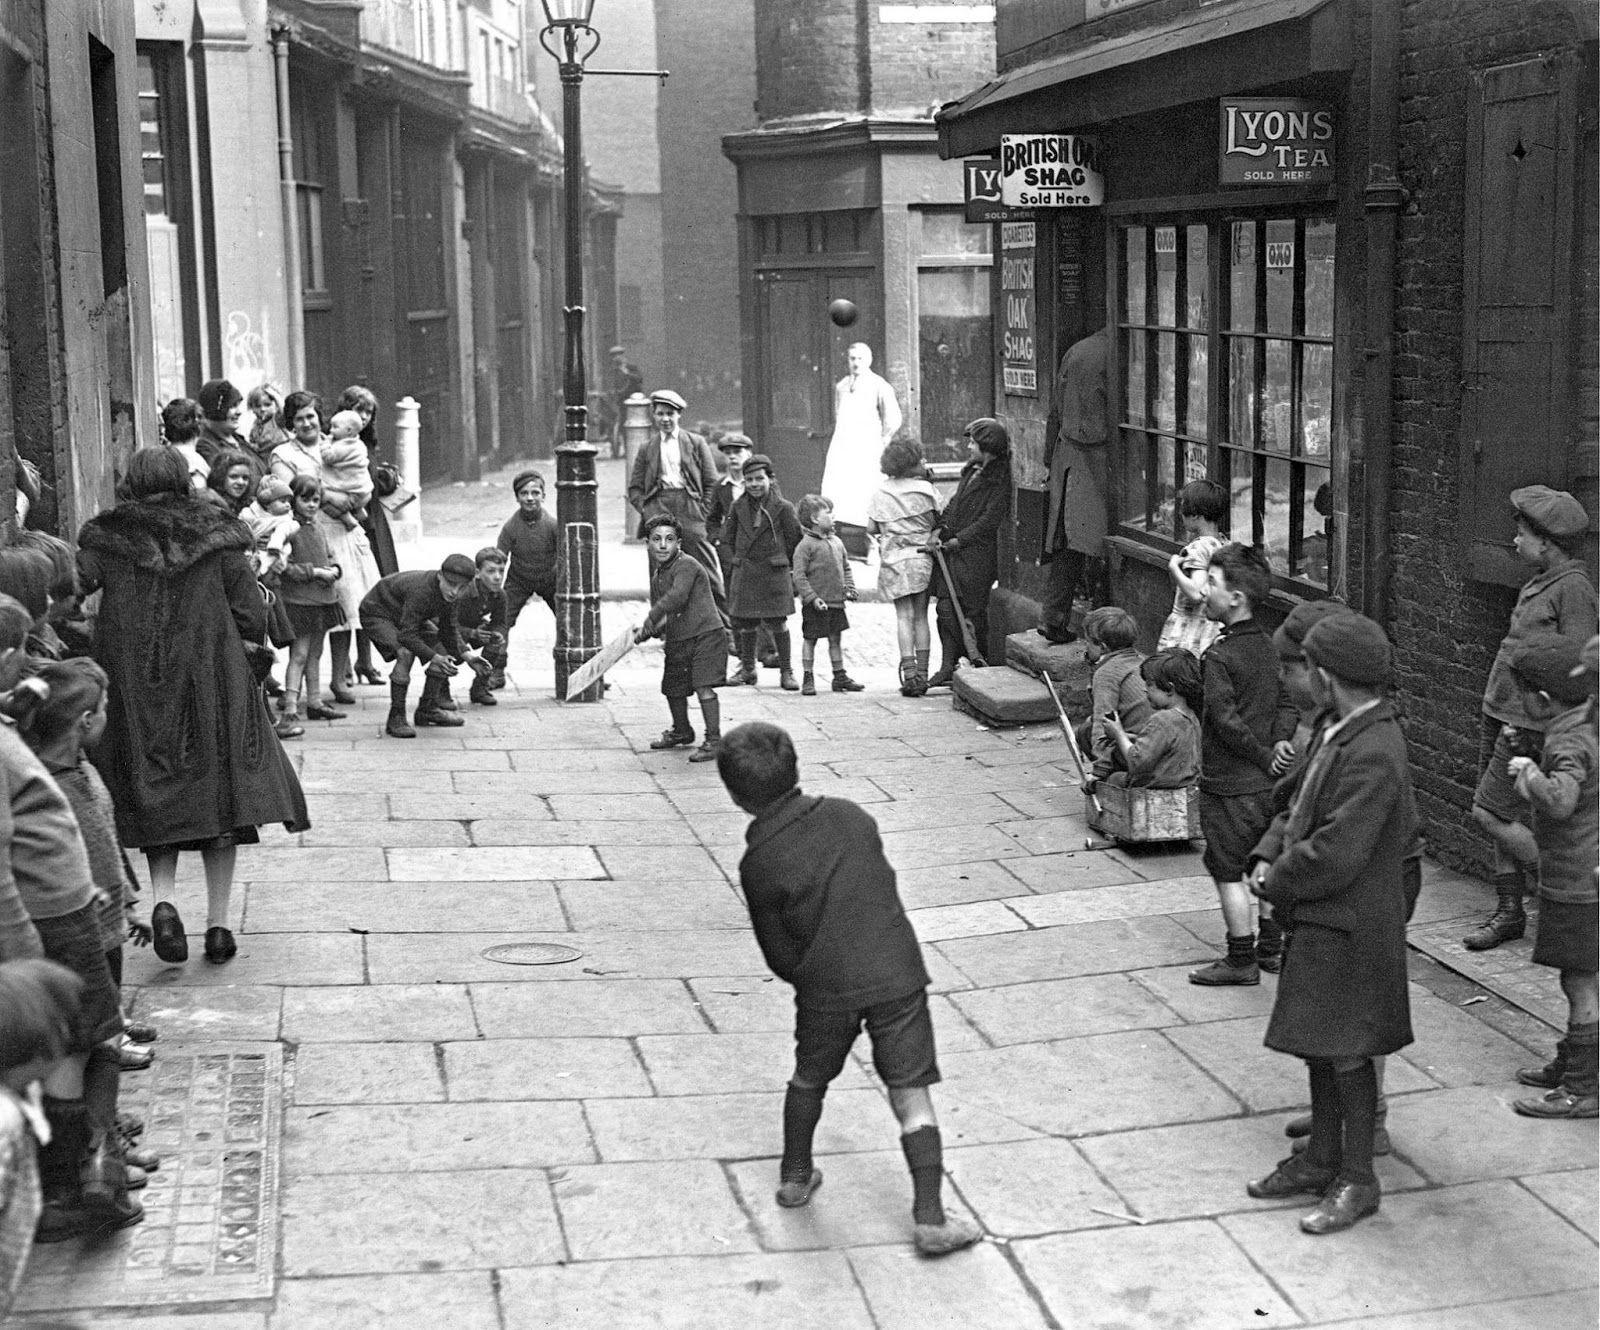 Children playing cricket in a London street (1930)